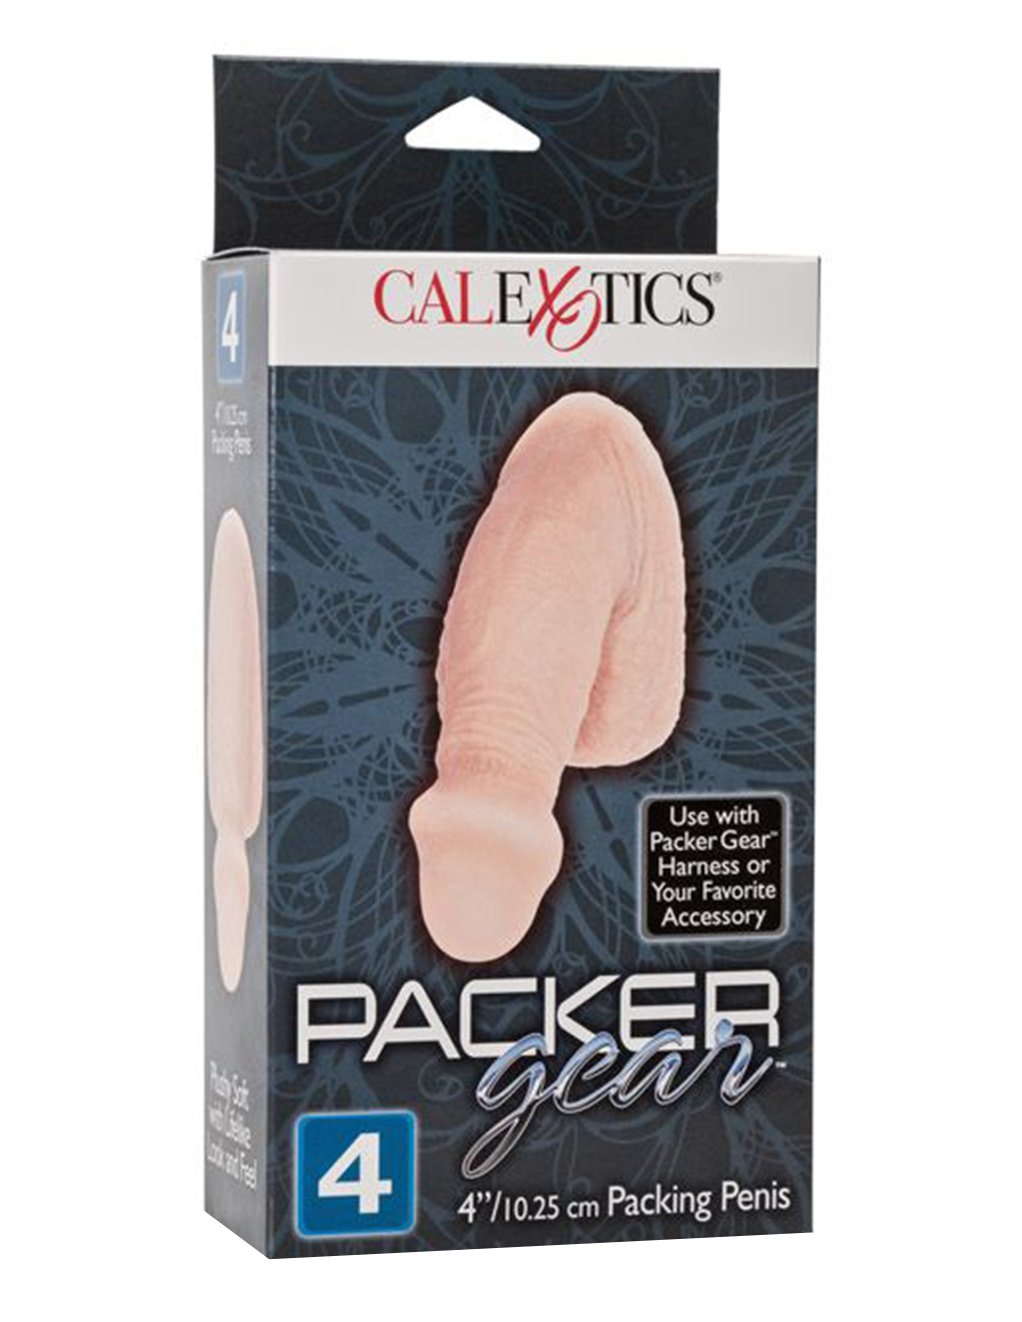 Packer Gear 4 Inch Packing Penis- Ivory- Front box